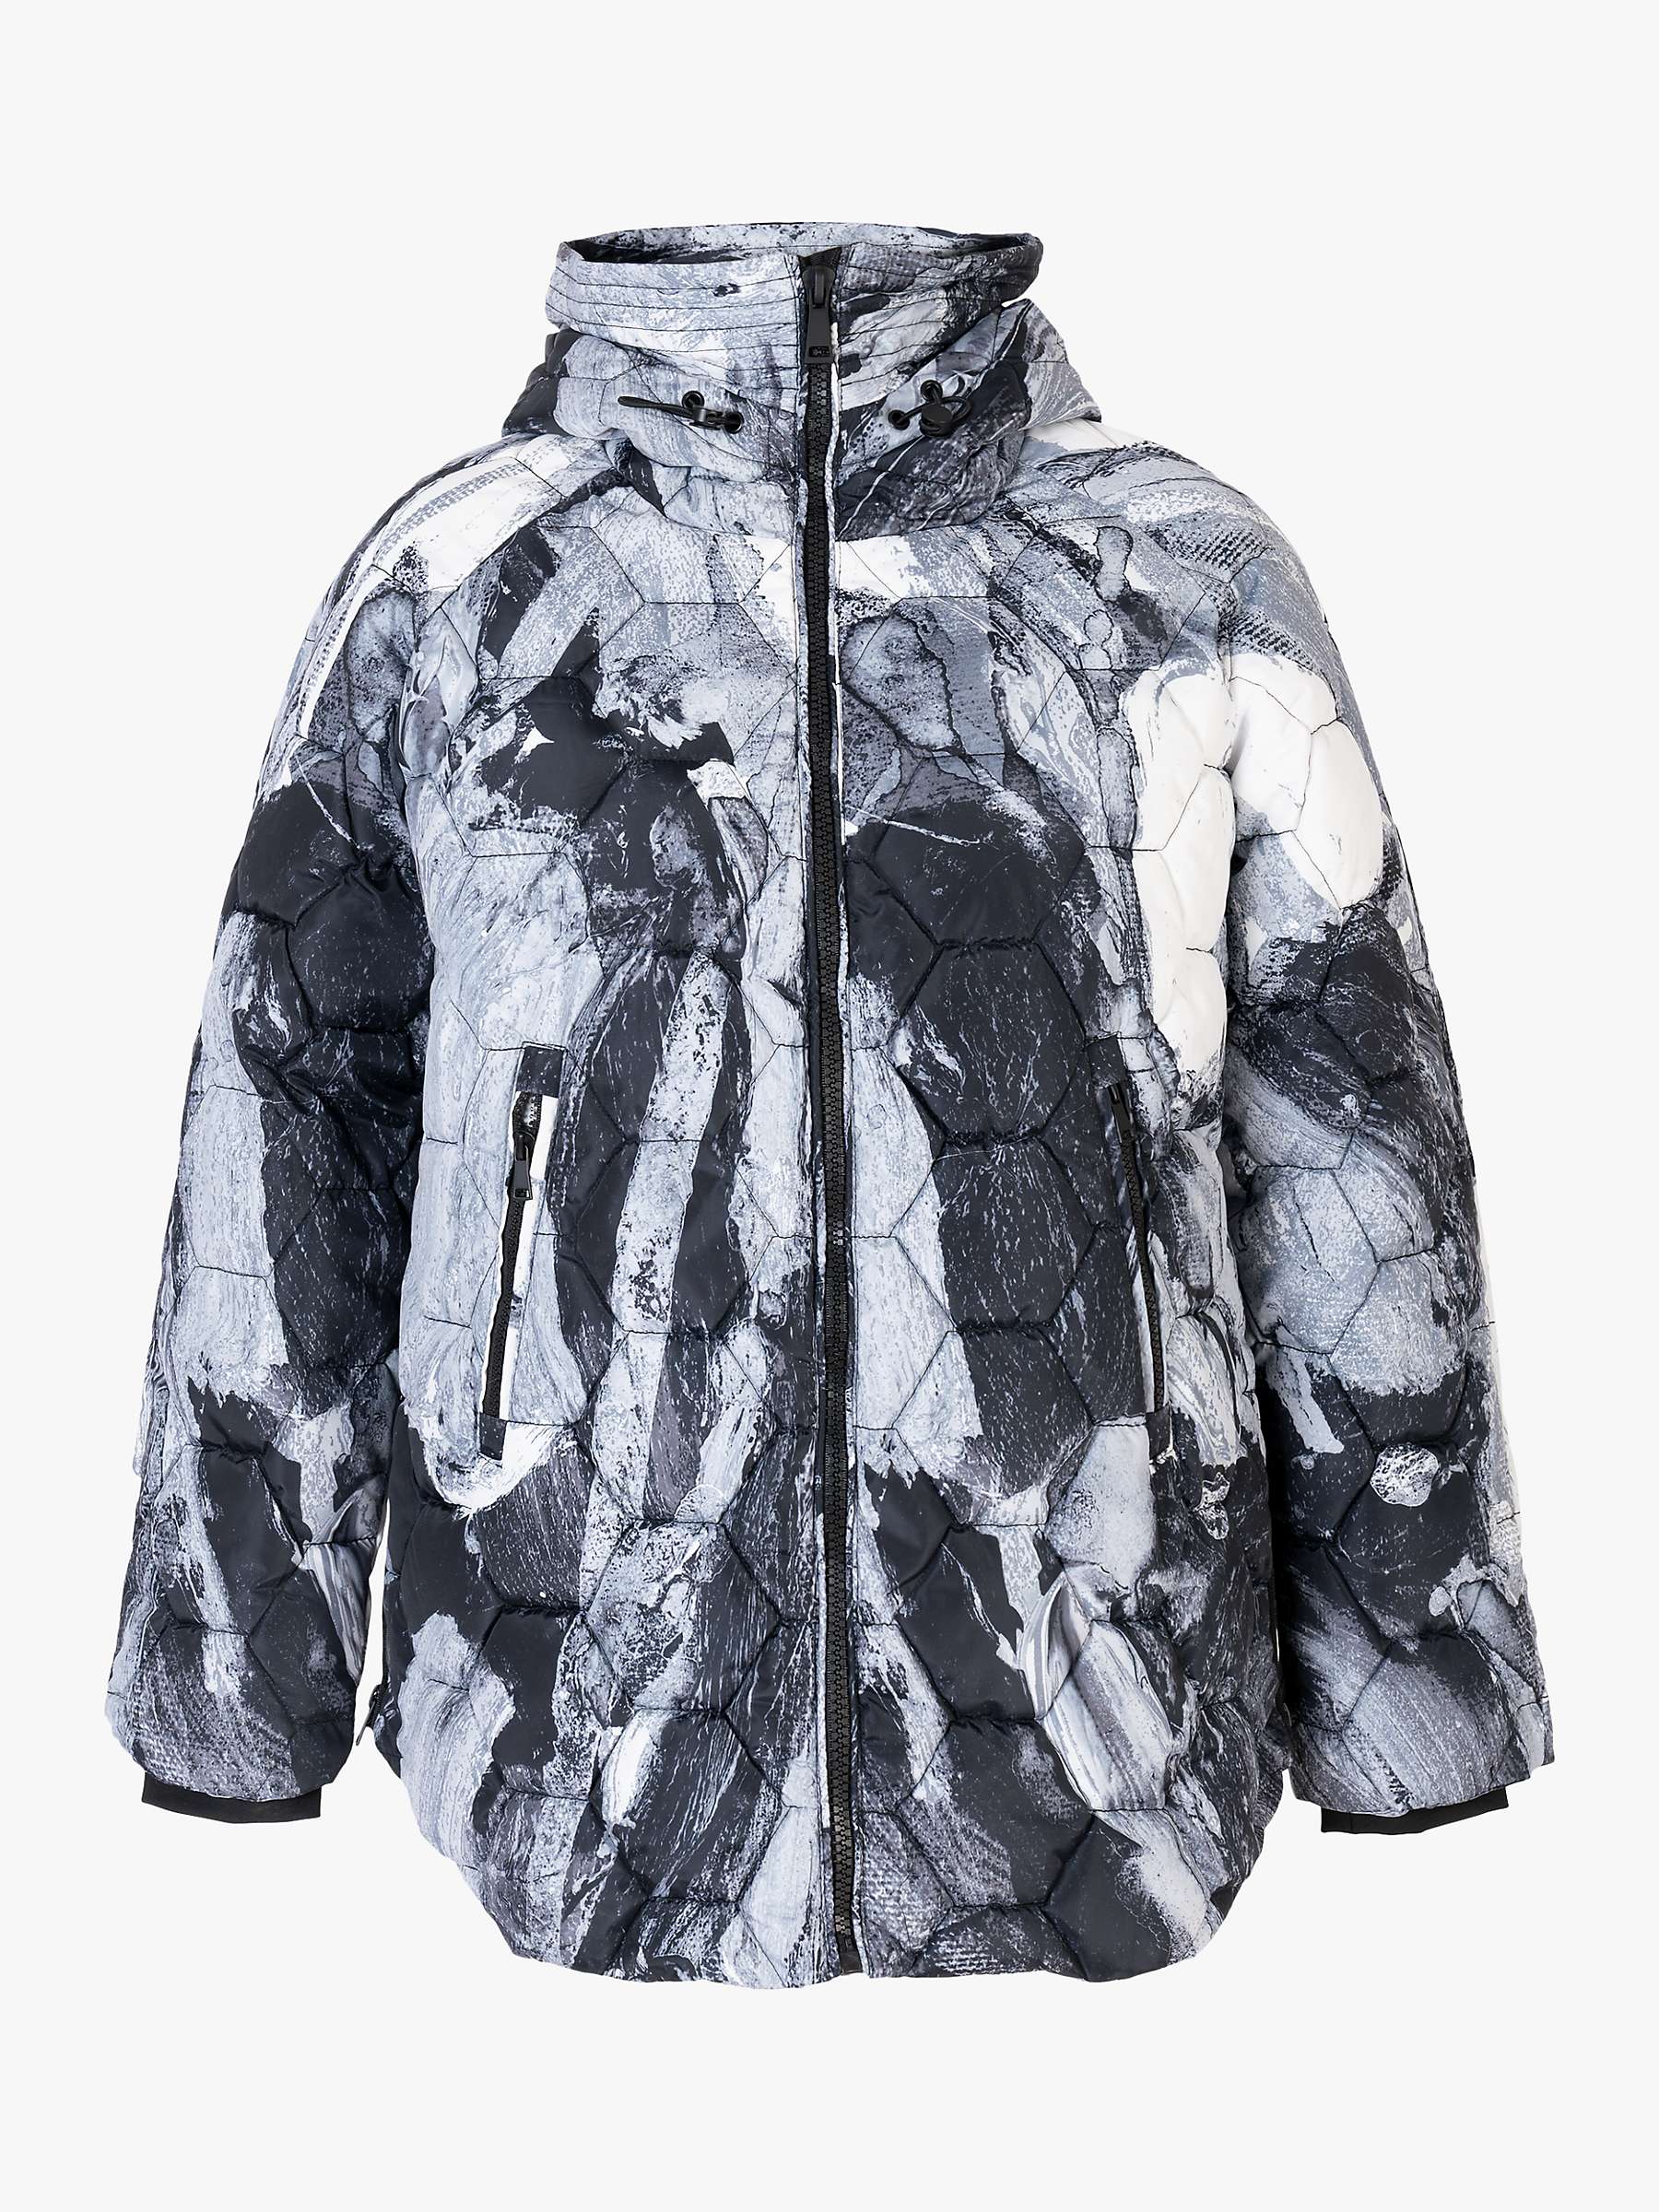 Buy chesca Abstract Print Quilted Jacket, Black/White Online at johnlewis.com